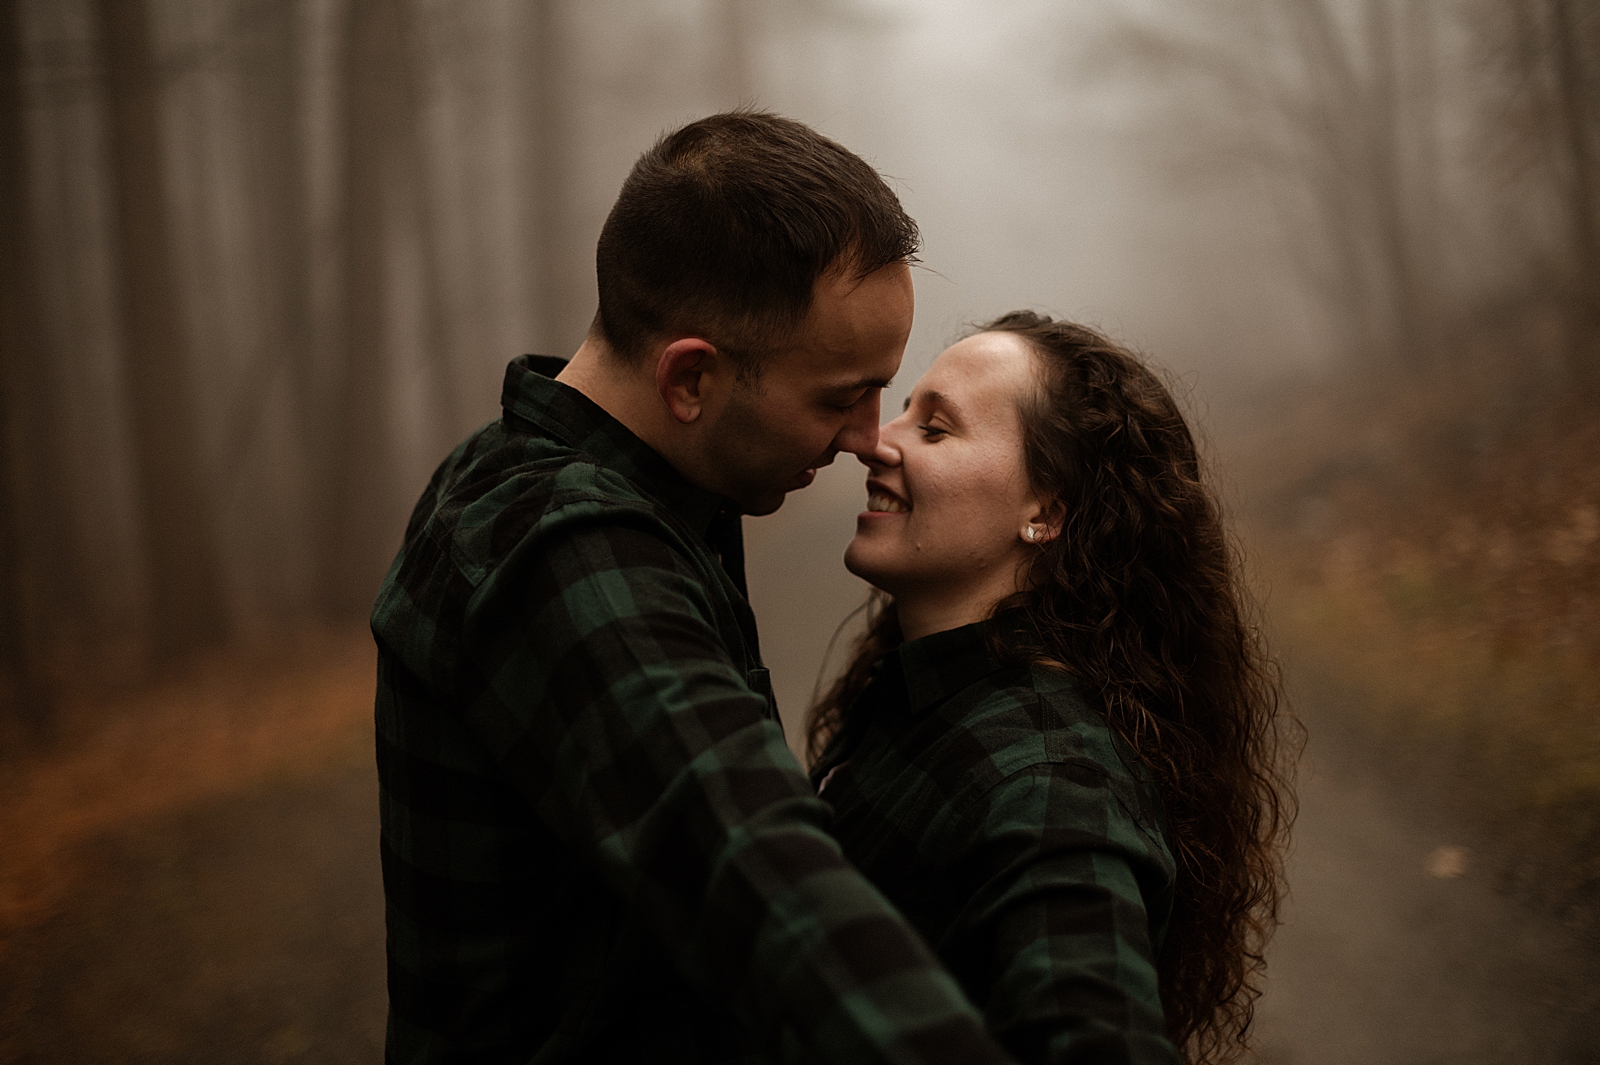 Couple leaning in to kiss in misty area